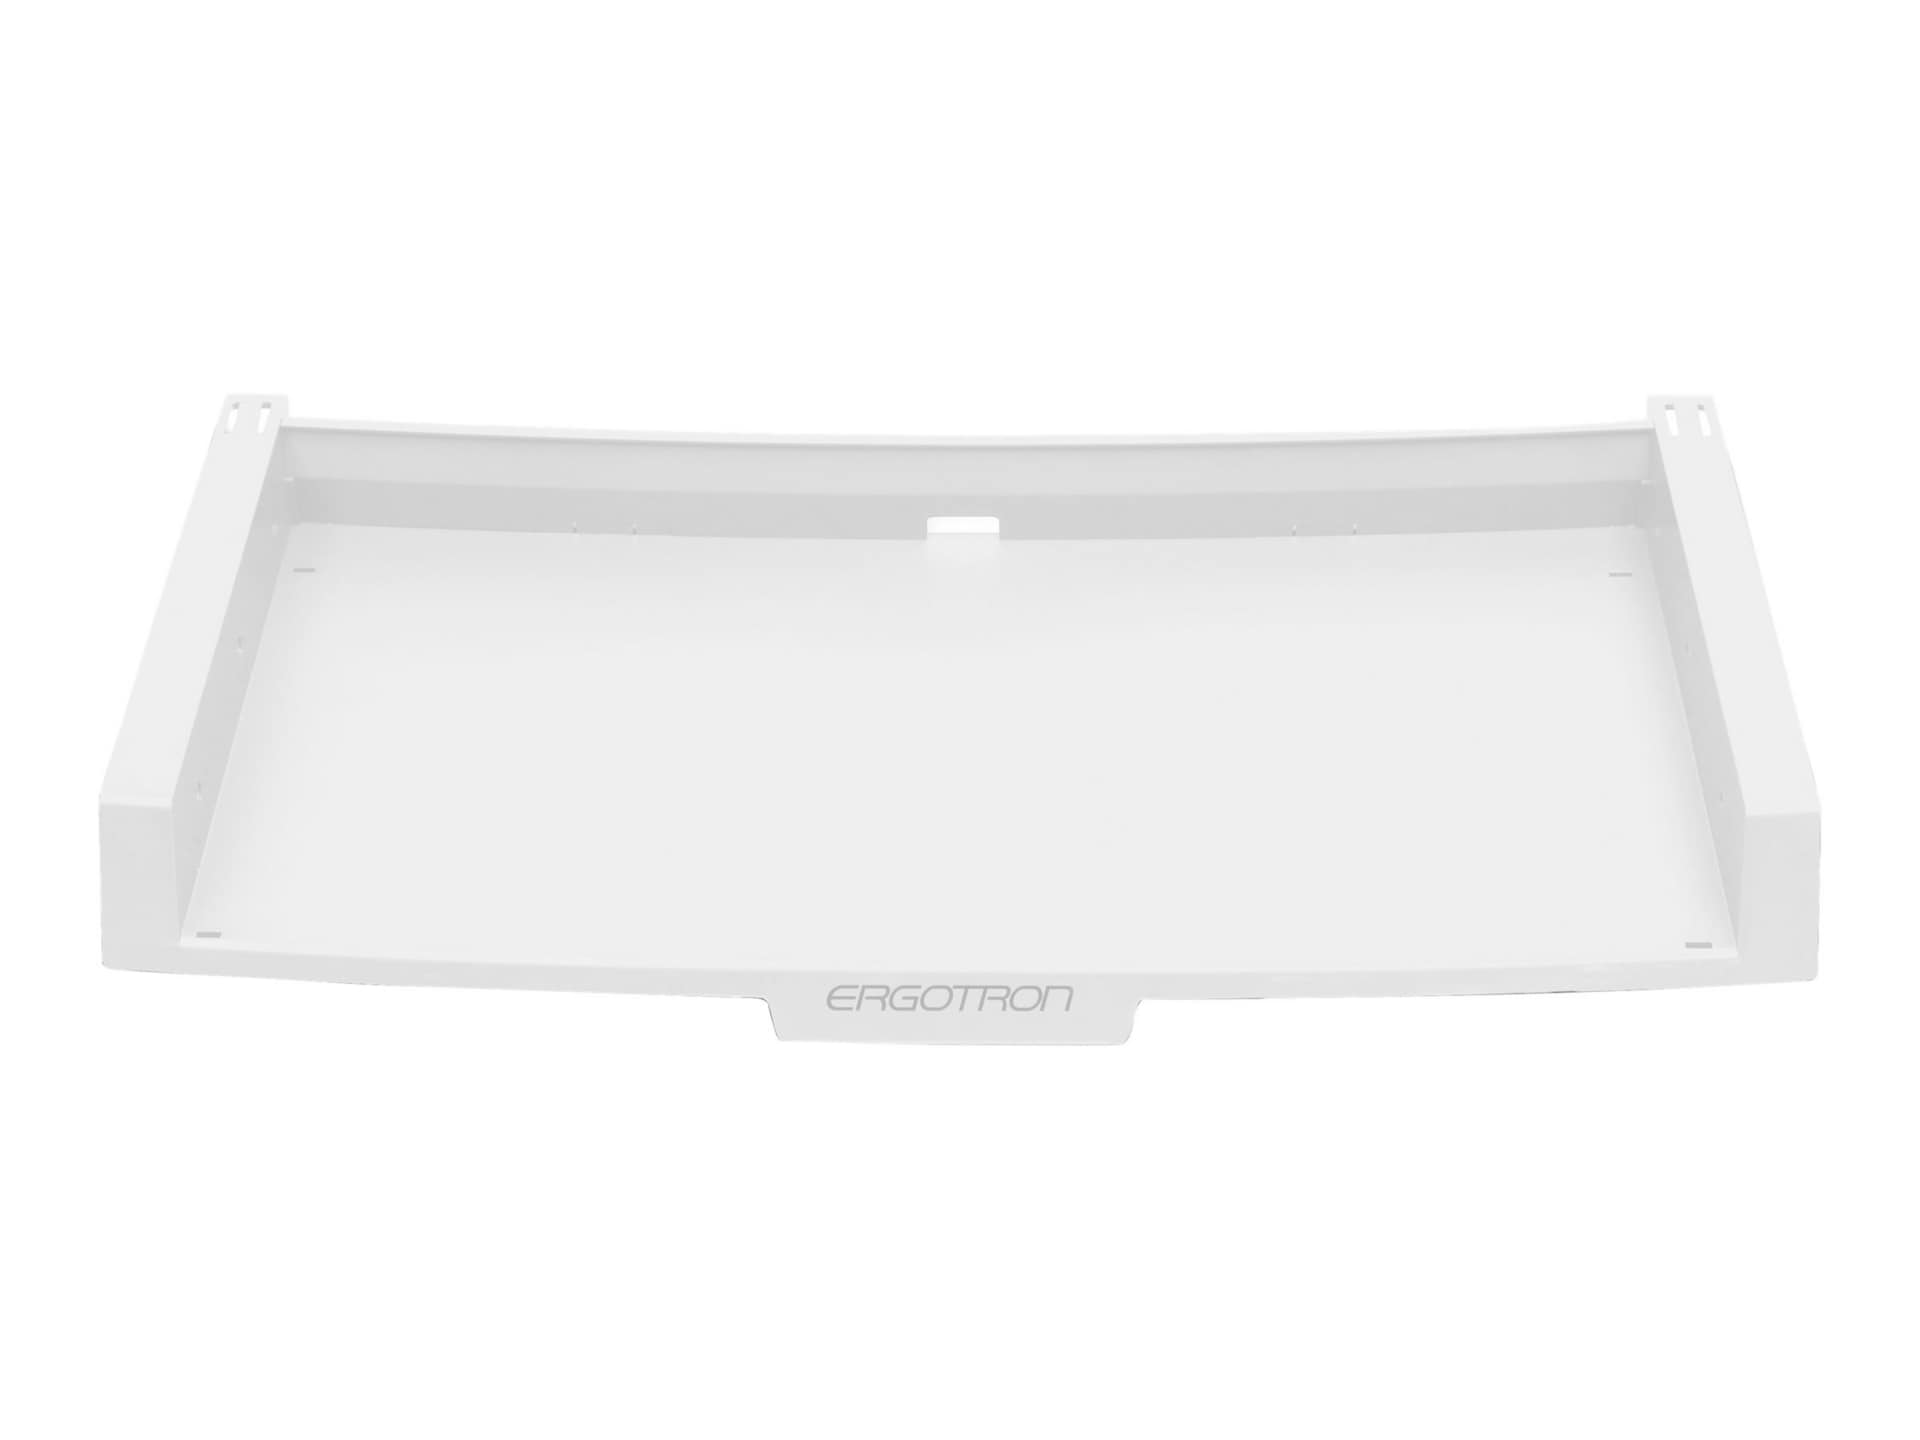 Ergotron Keyboard Tray with Debris Barrier Upgrade Kit mounting component -